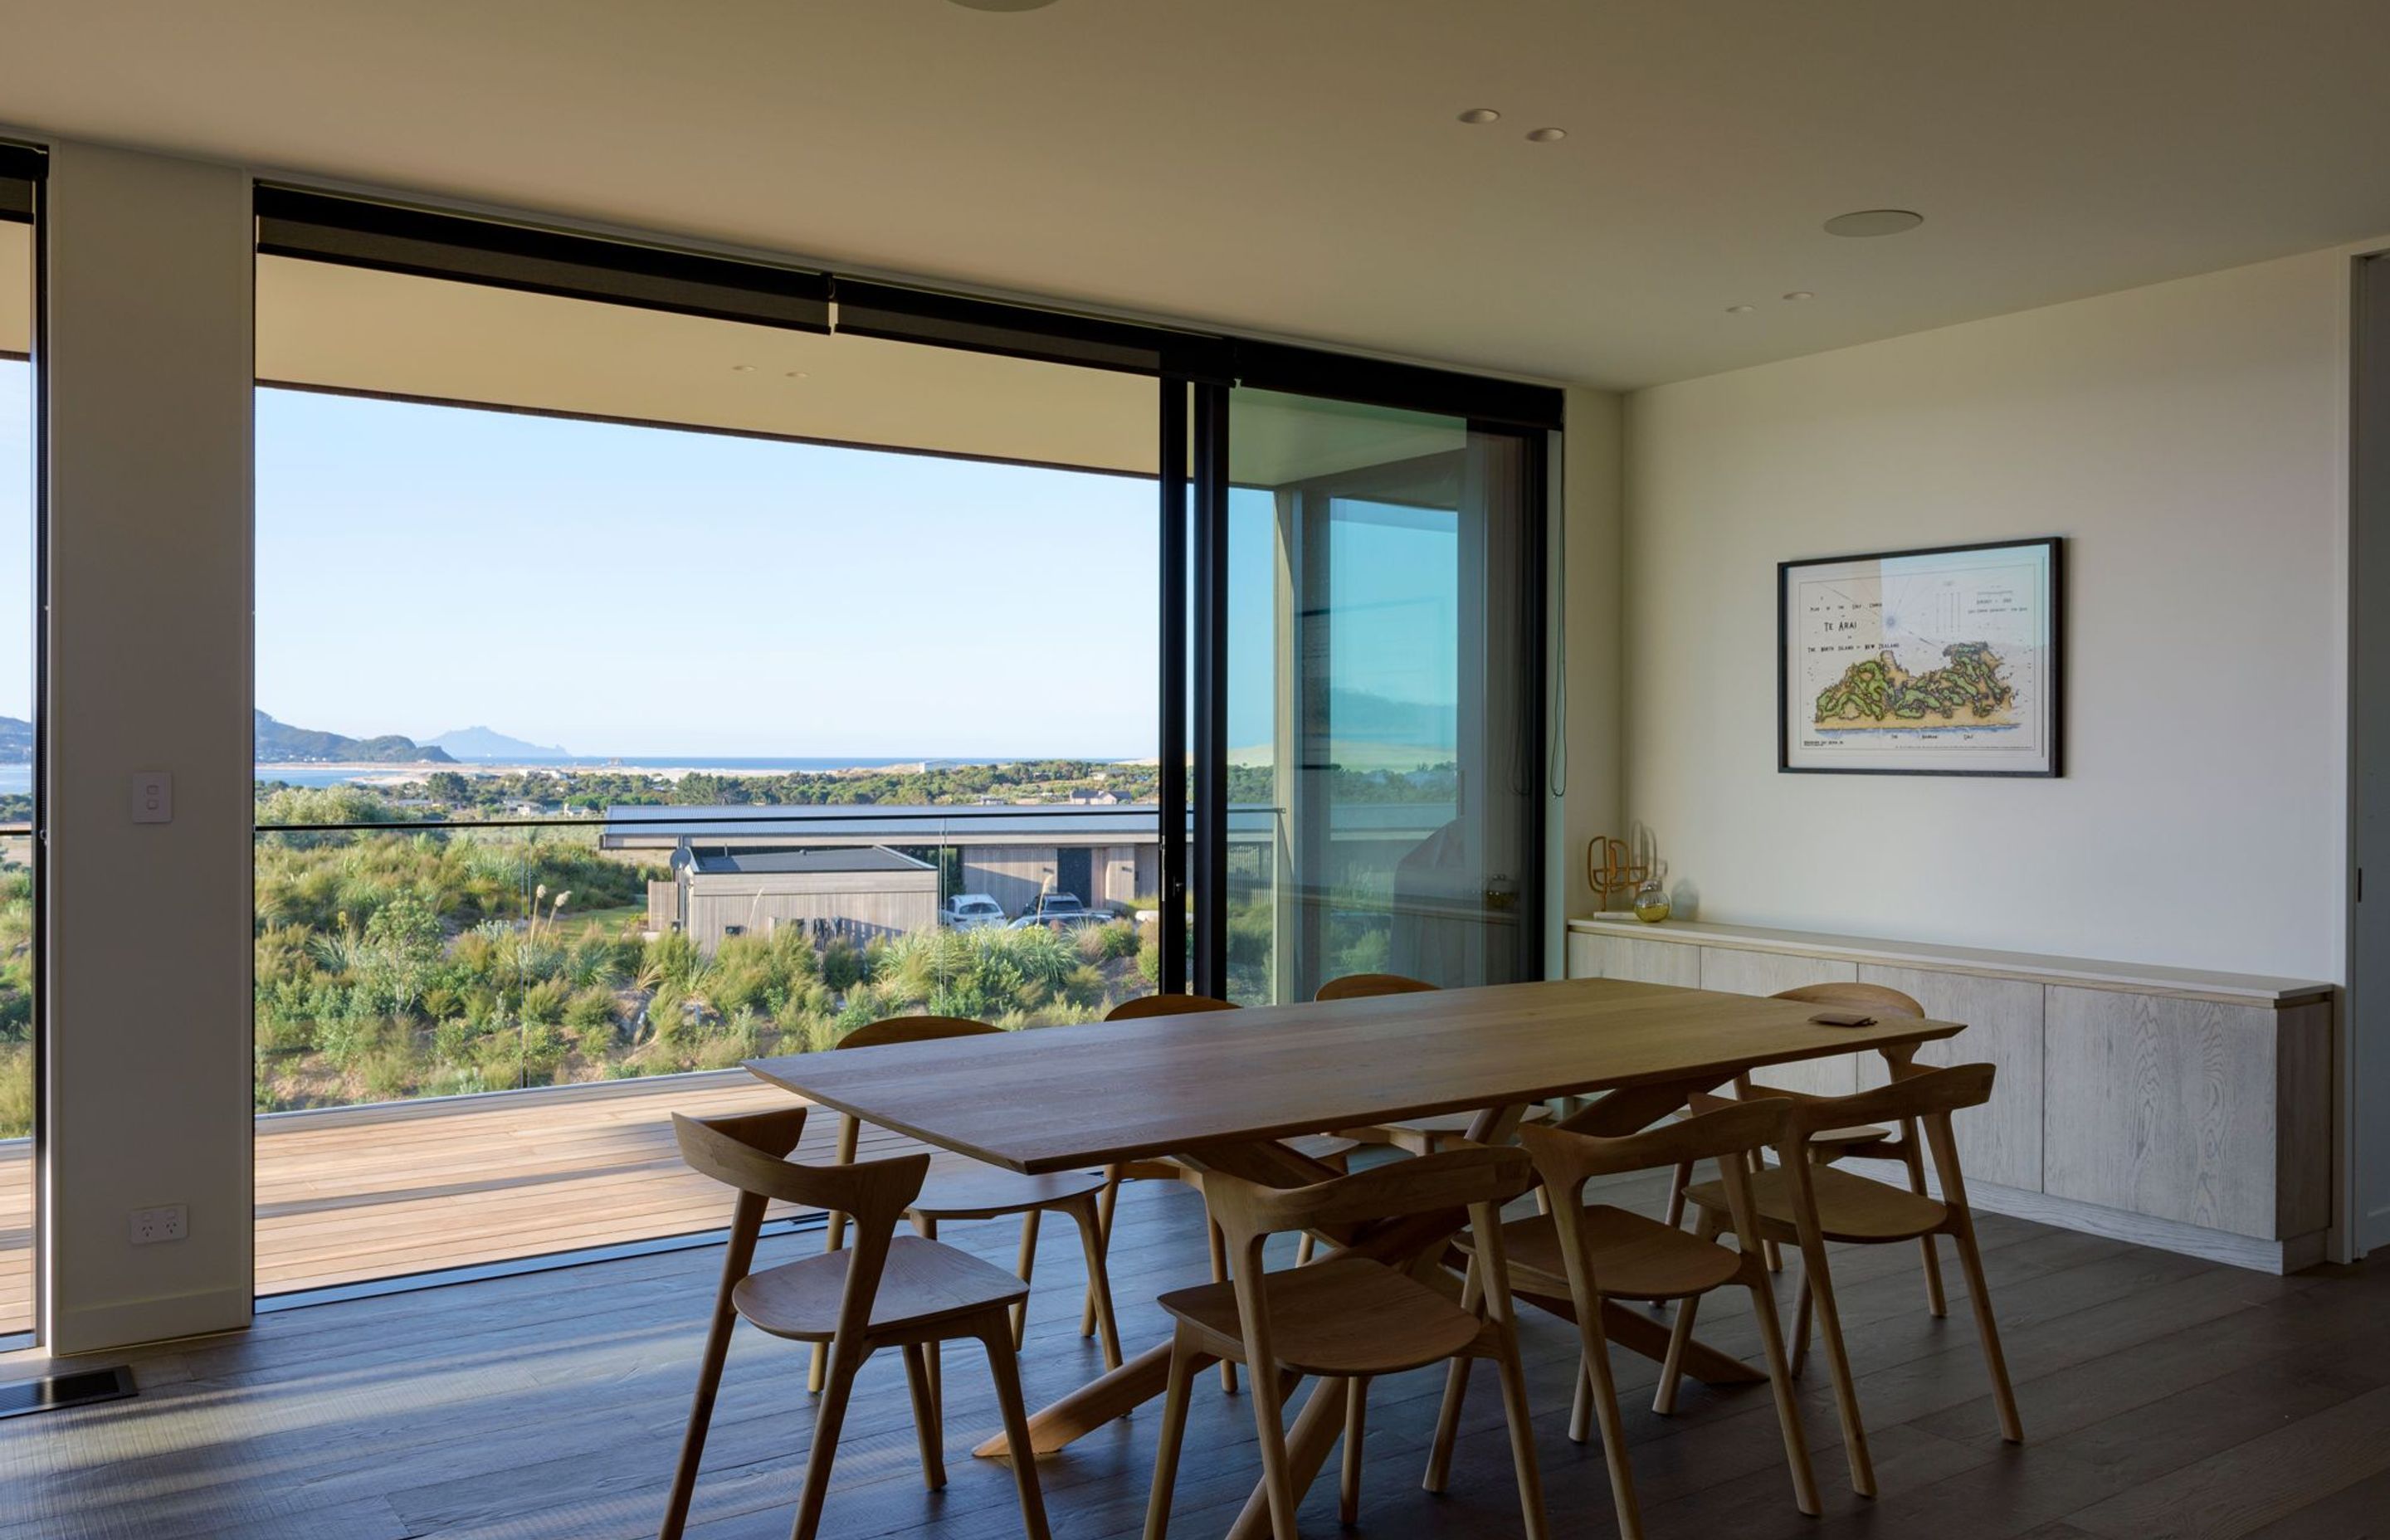 Extensive decking accessed by sliding doors allows the living and dining areas to open up to the outdoors. 